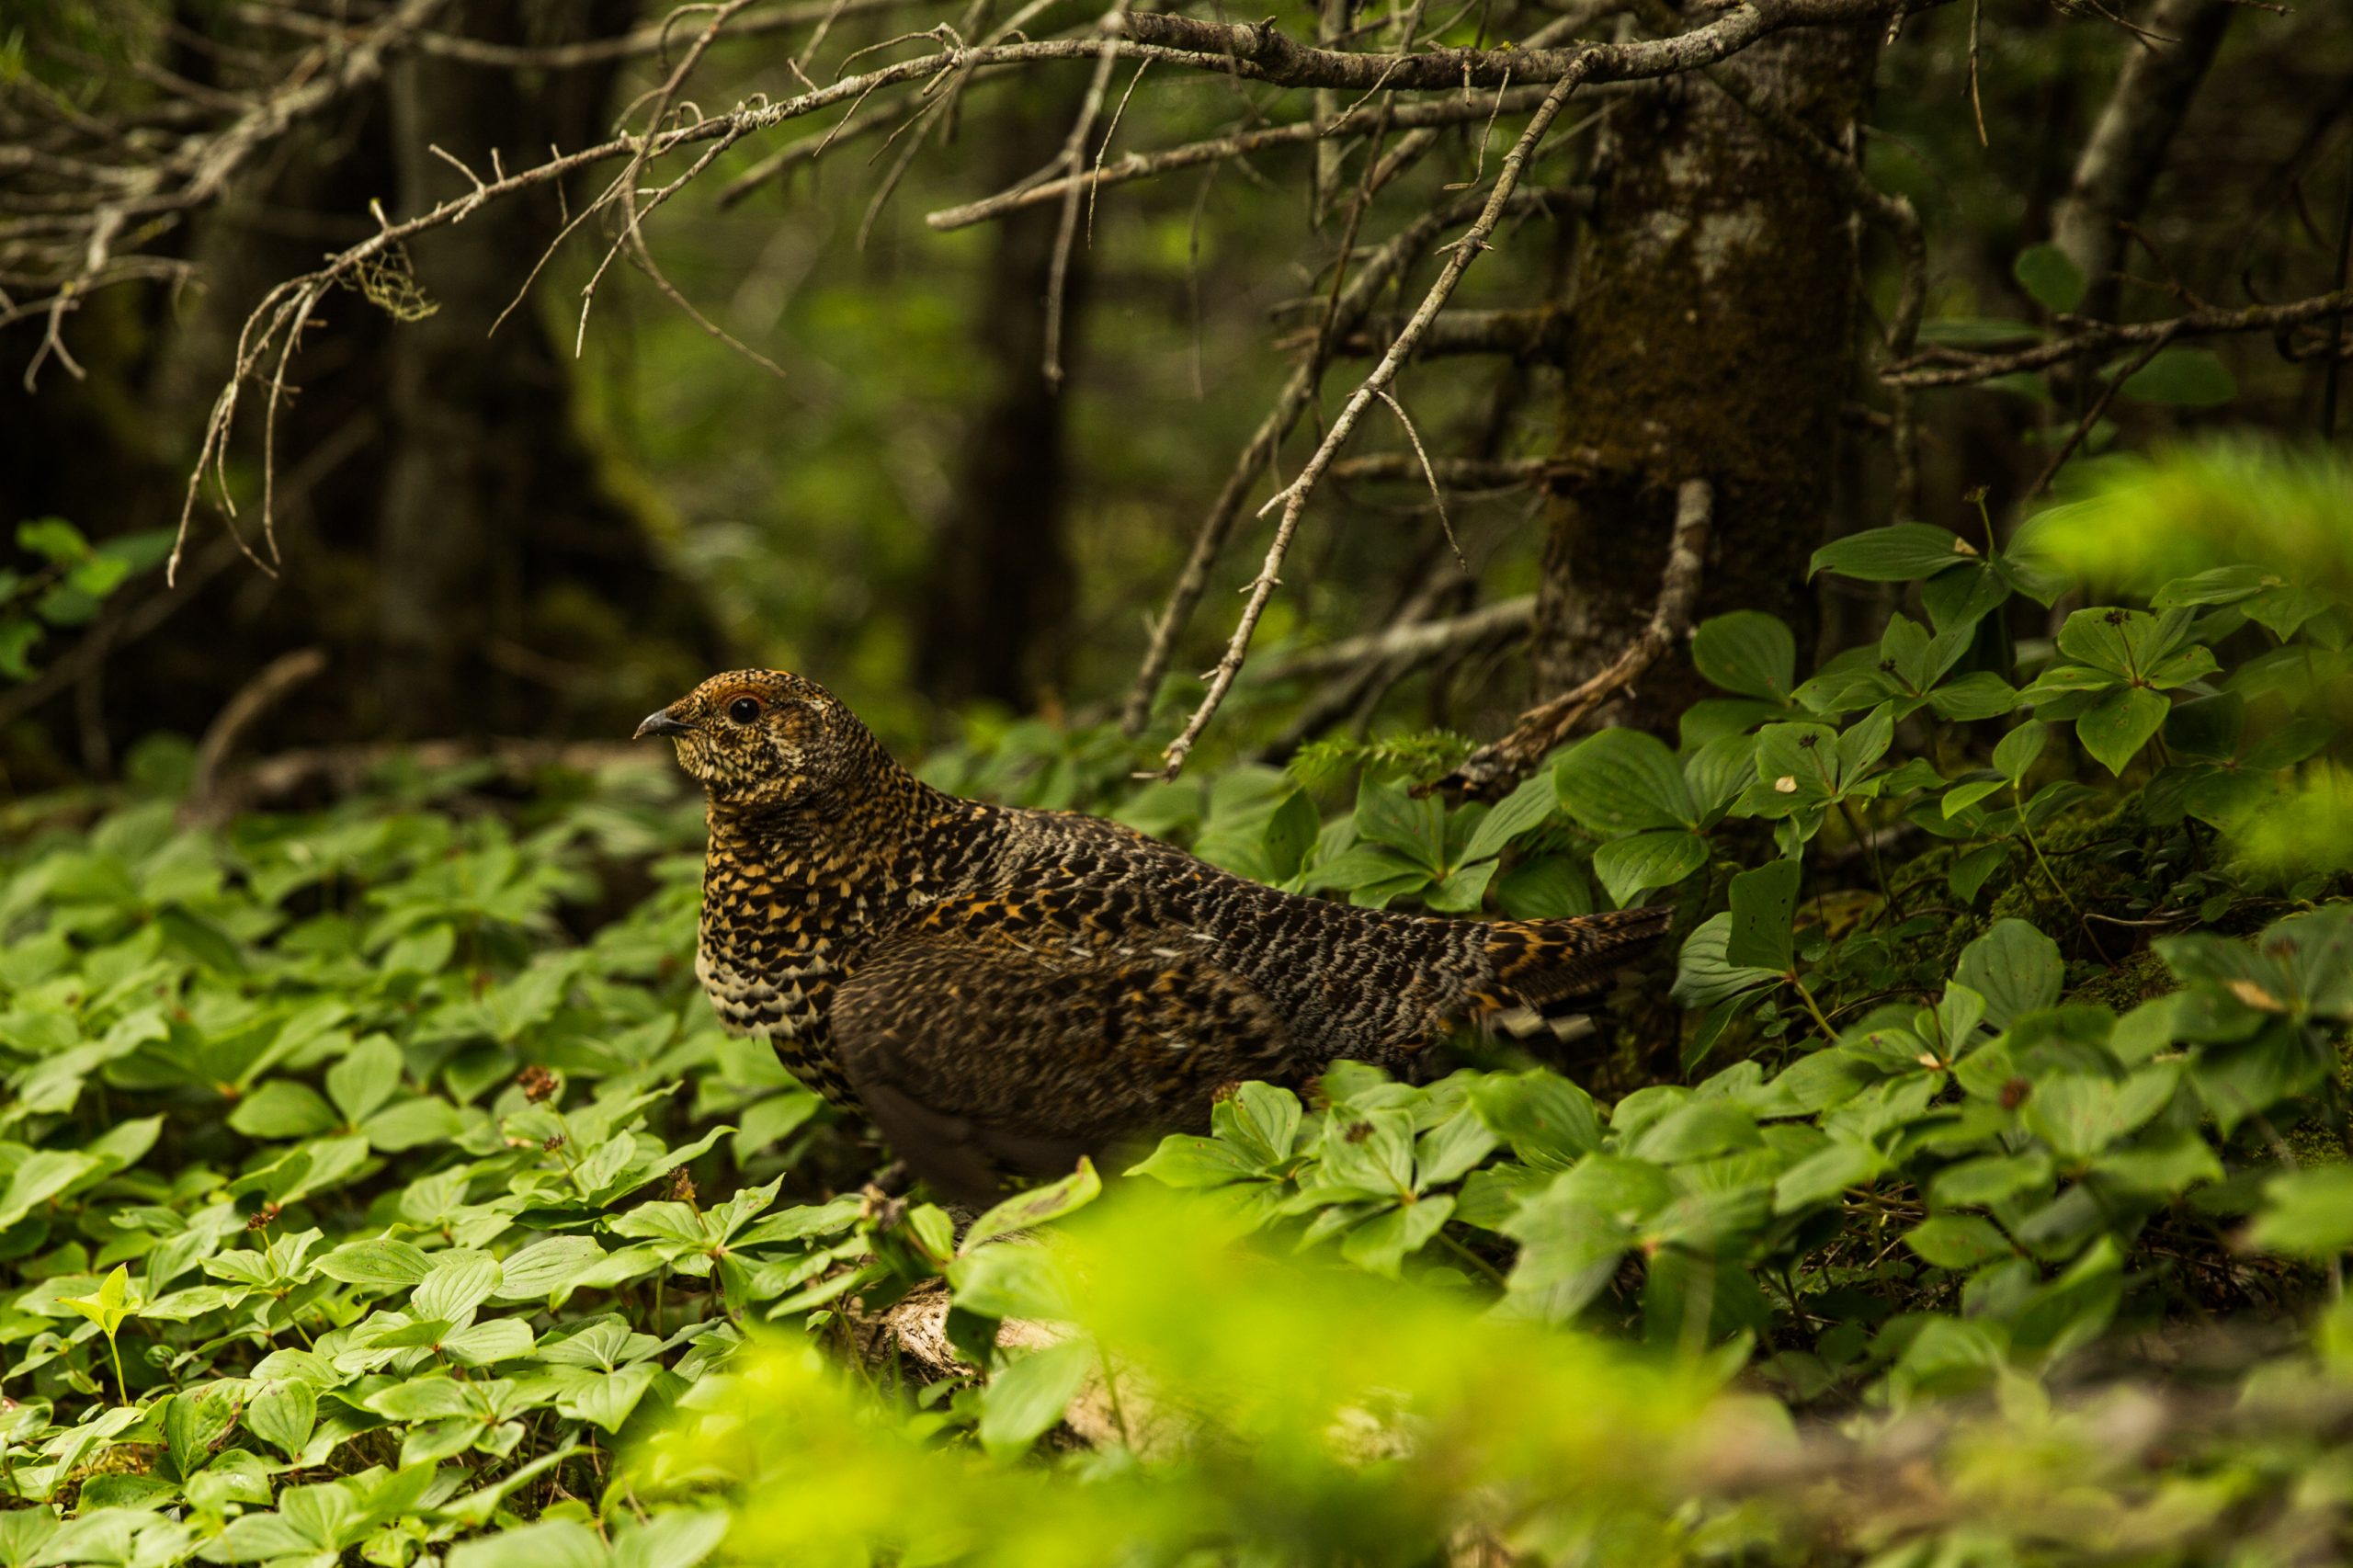 Spruce Grouse in the forest.